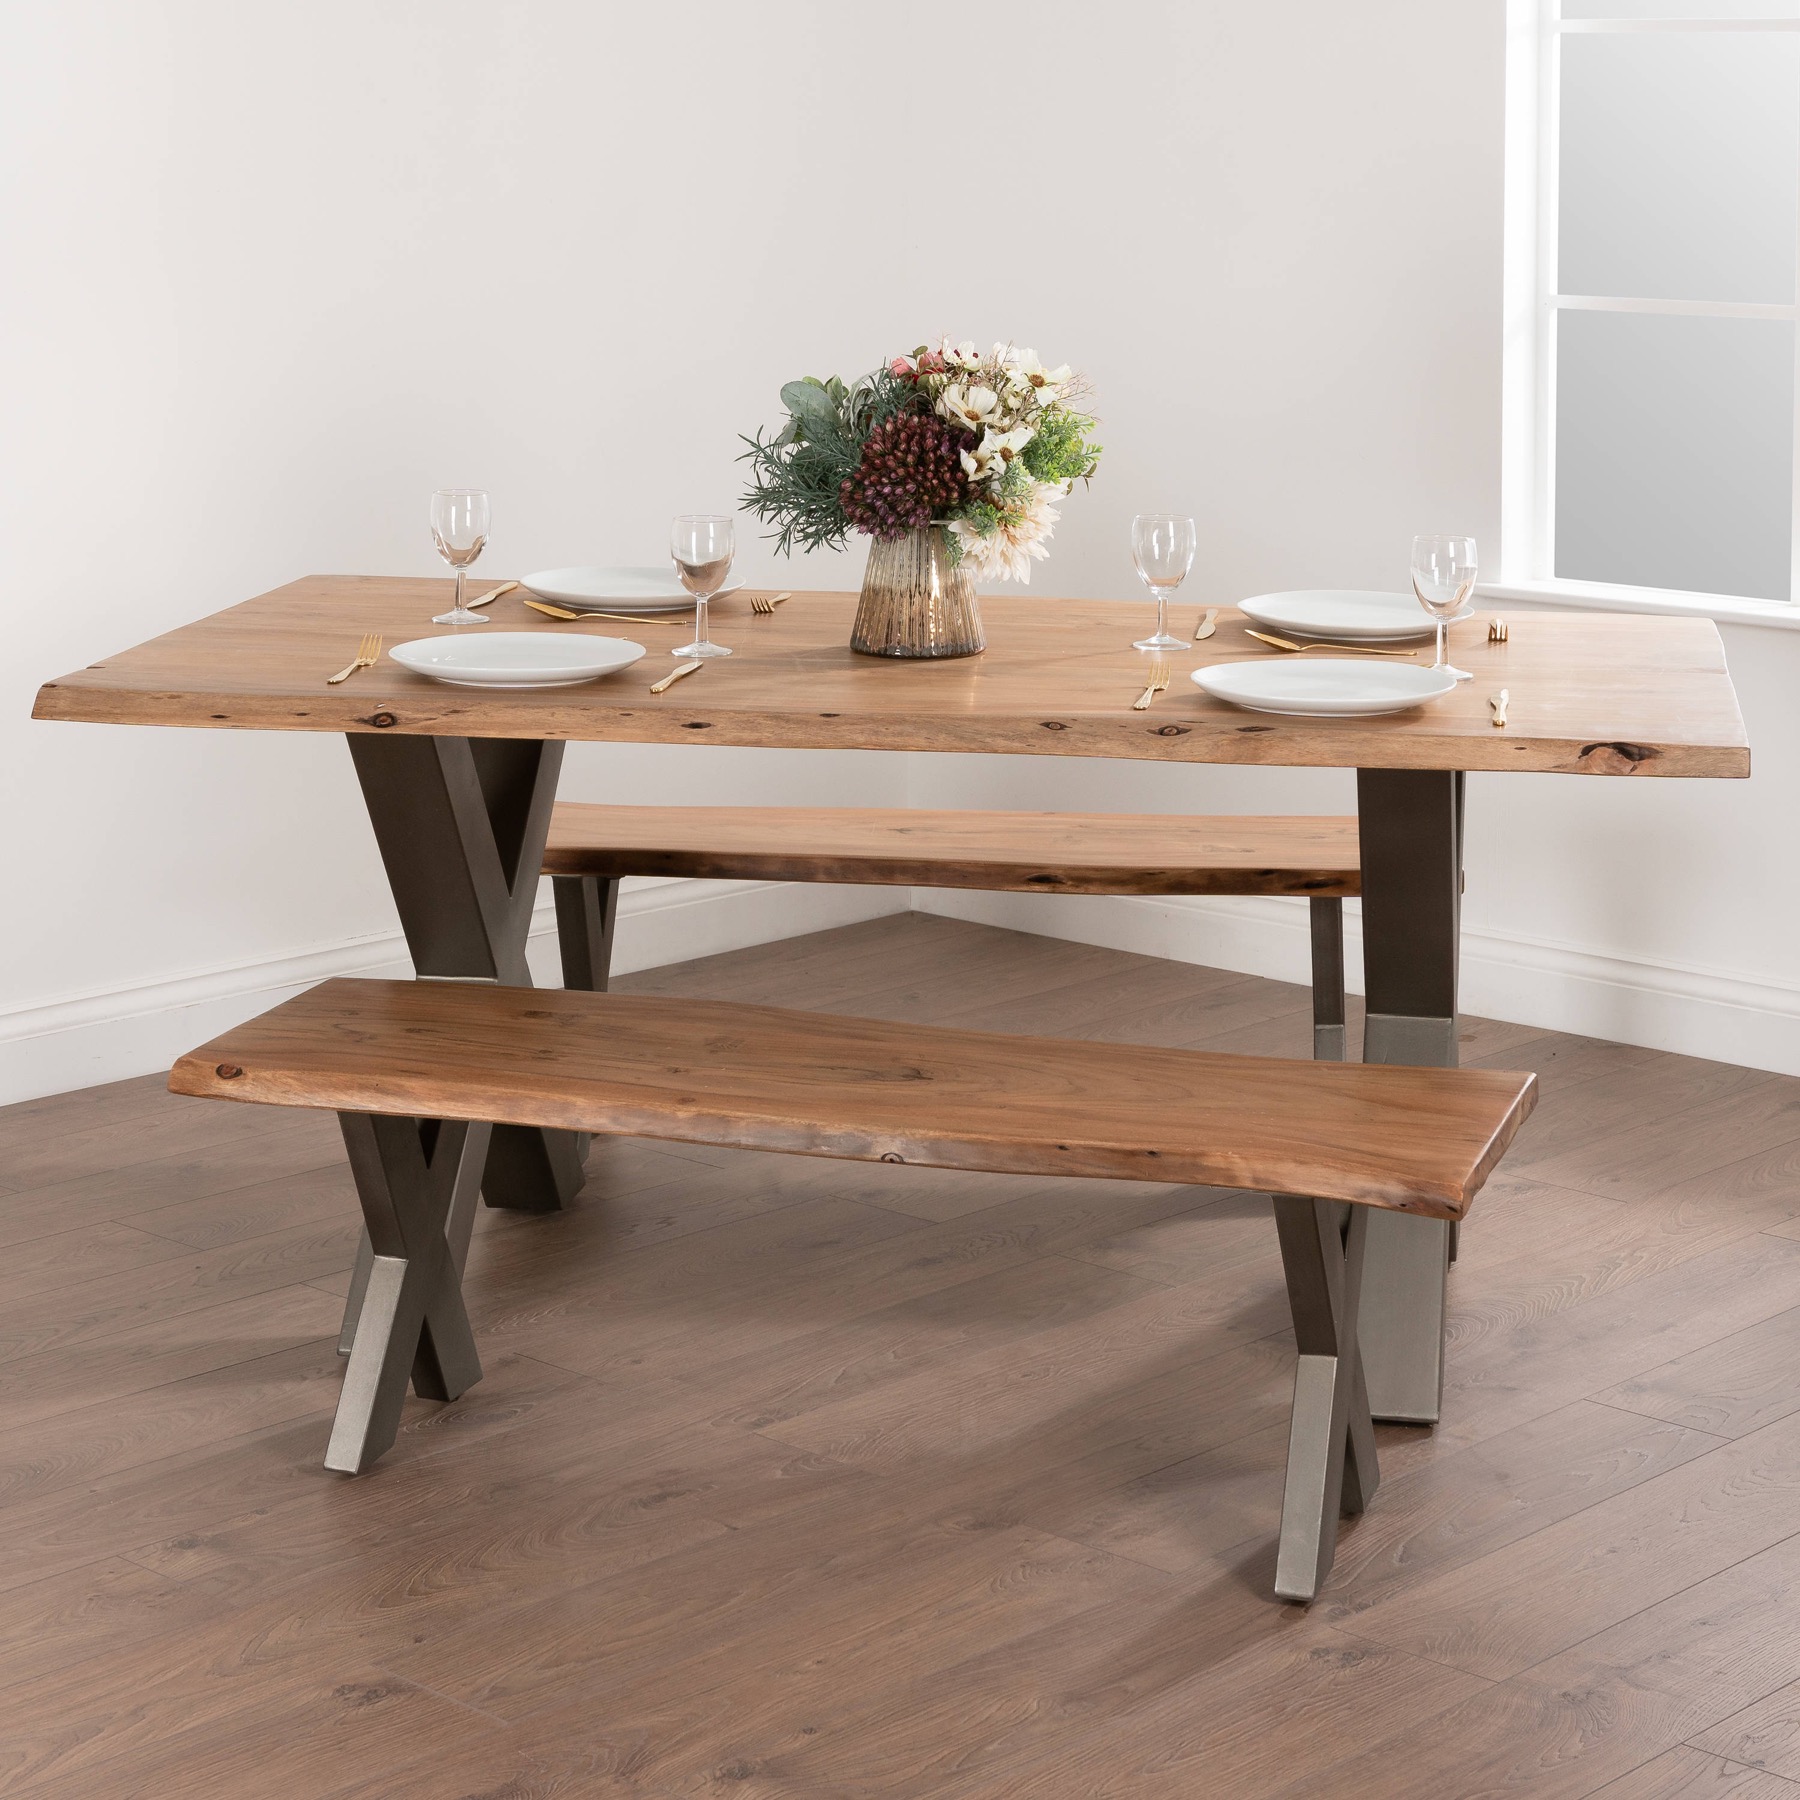 Live Edge Collection Dining Table - Image 4